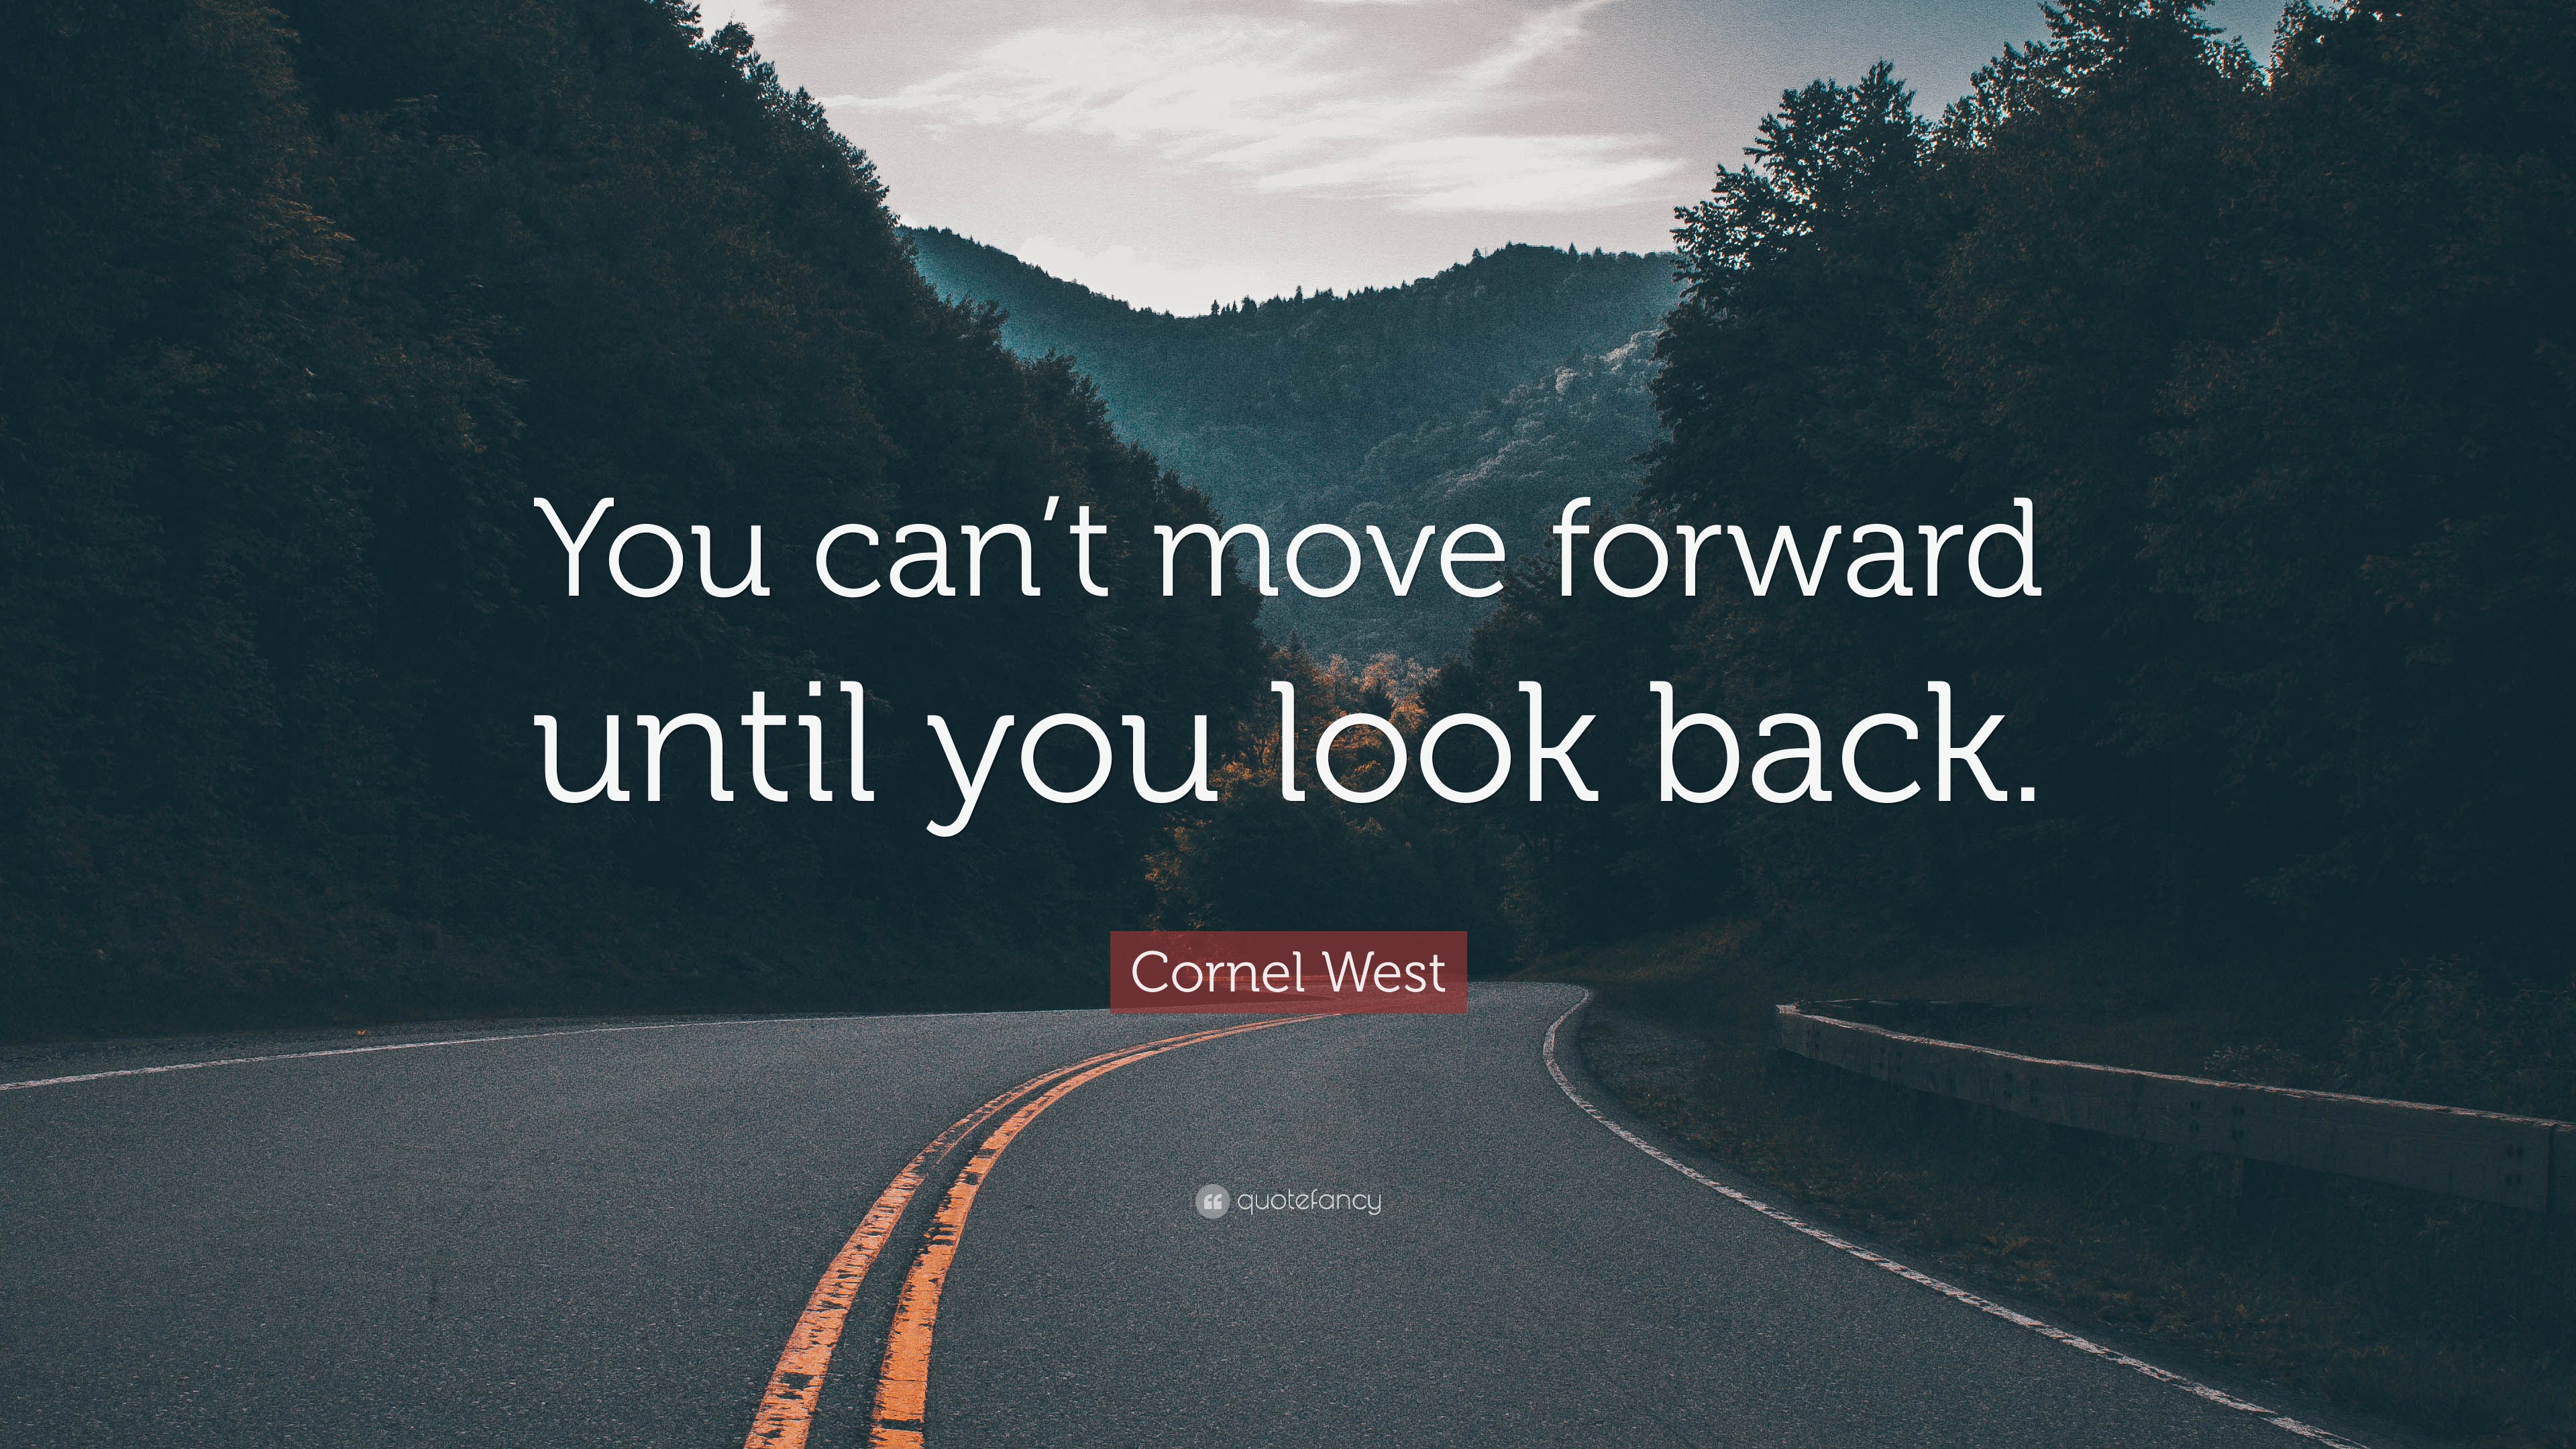 Quotes About Looking Back To Move Forward - Indira Minnaminnie